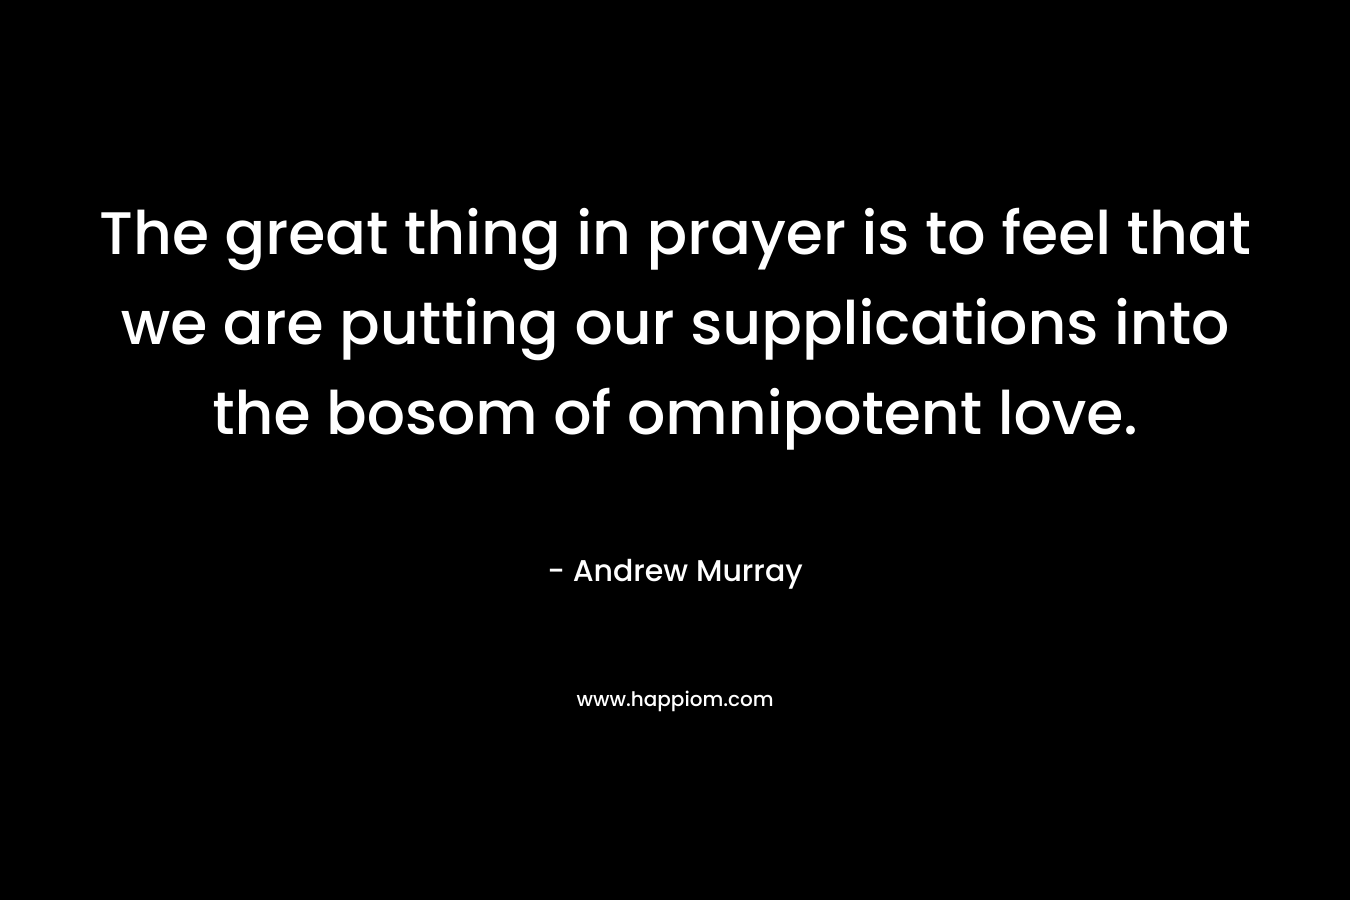 The great thing in prayer is to feel that we are putting our supplications into the bosom of omnipotent love.